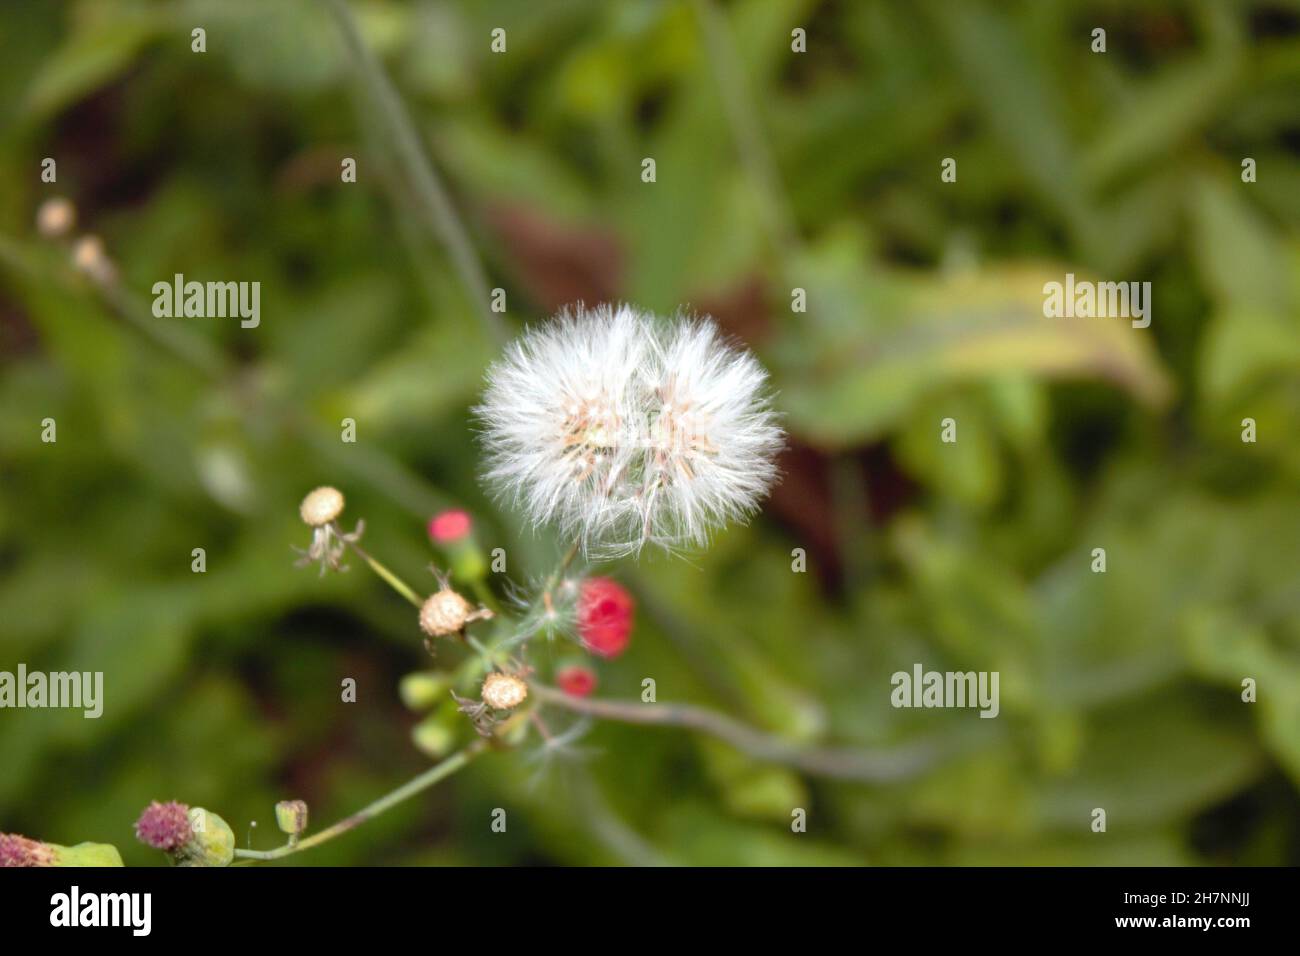 Close-up of a dandelion or Taraxacum officinale, isolated in the garden in the daytime. It is a perennial herbaceous plant in the Asteraceae family. Stock Photo